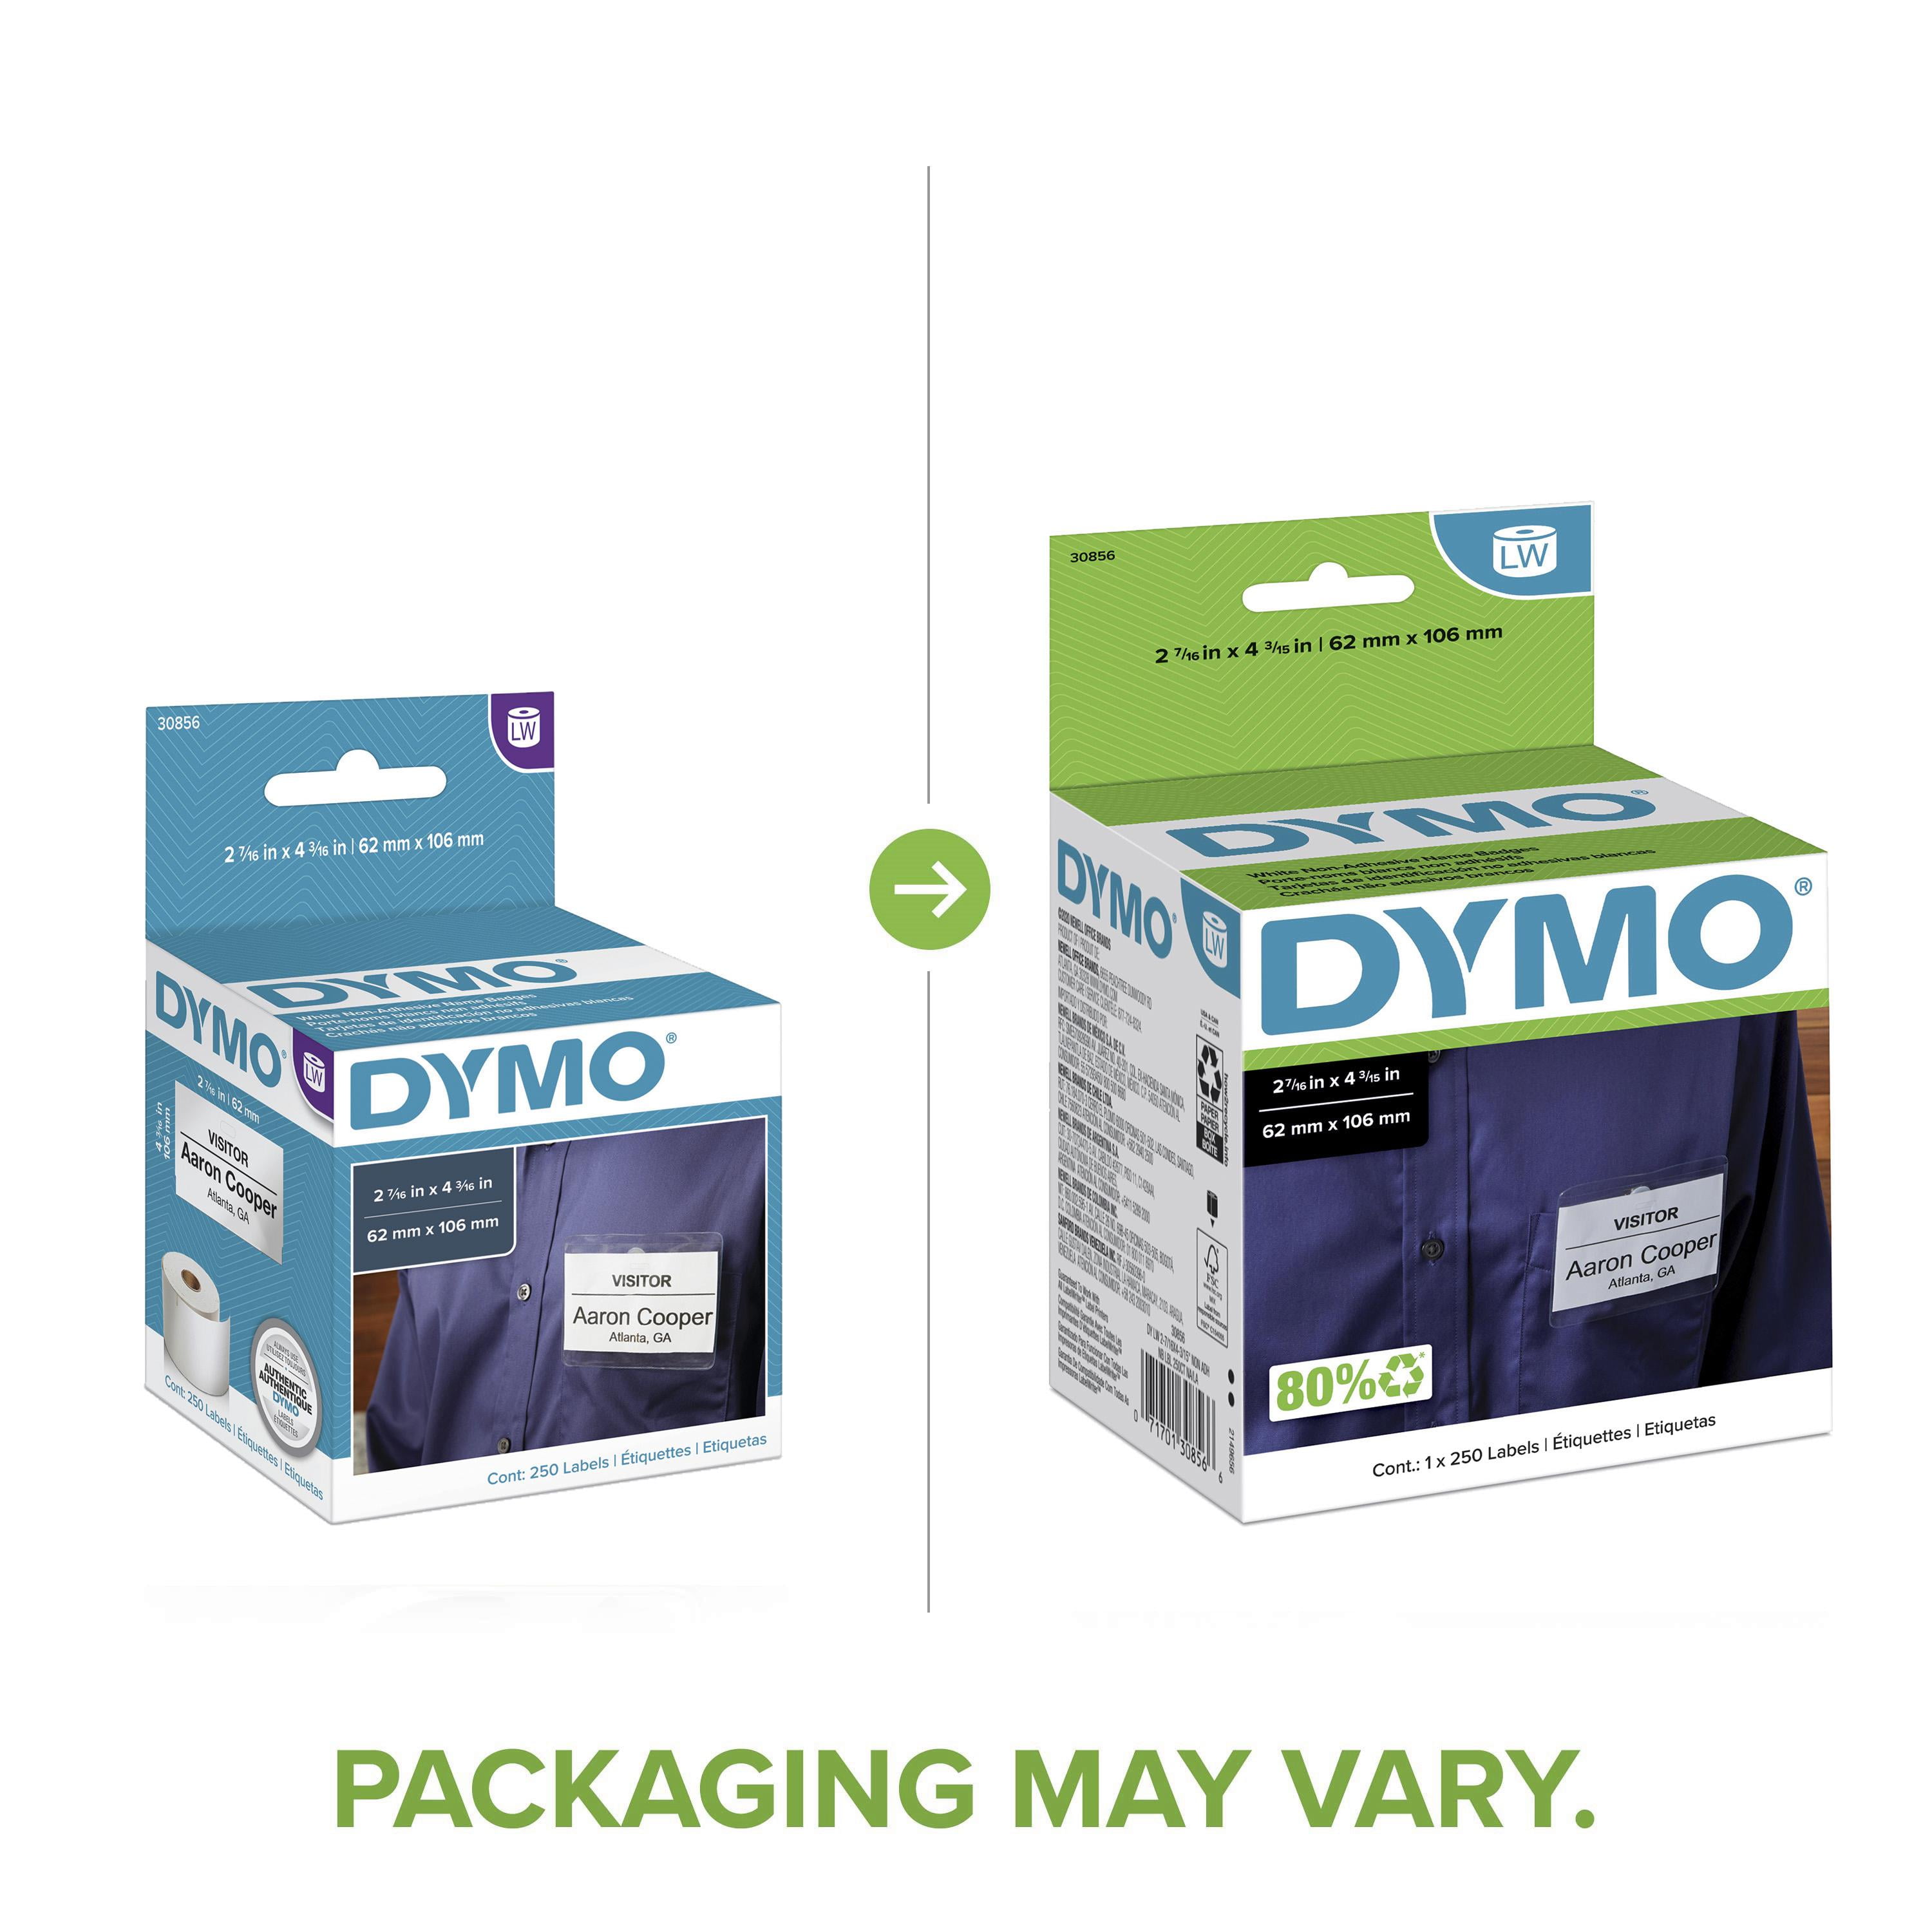 DYMO LW Non-Adhesive Name Badge Labels for LabelWriter Label